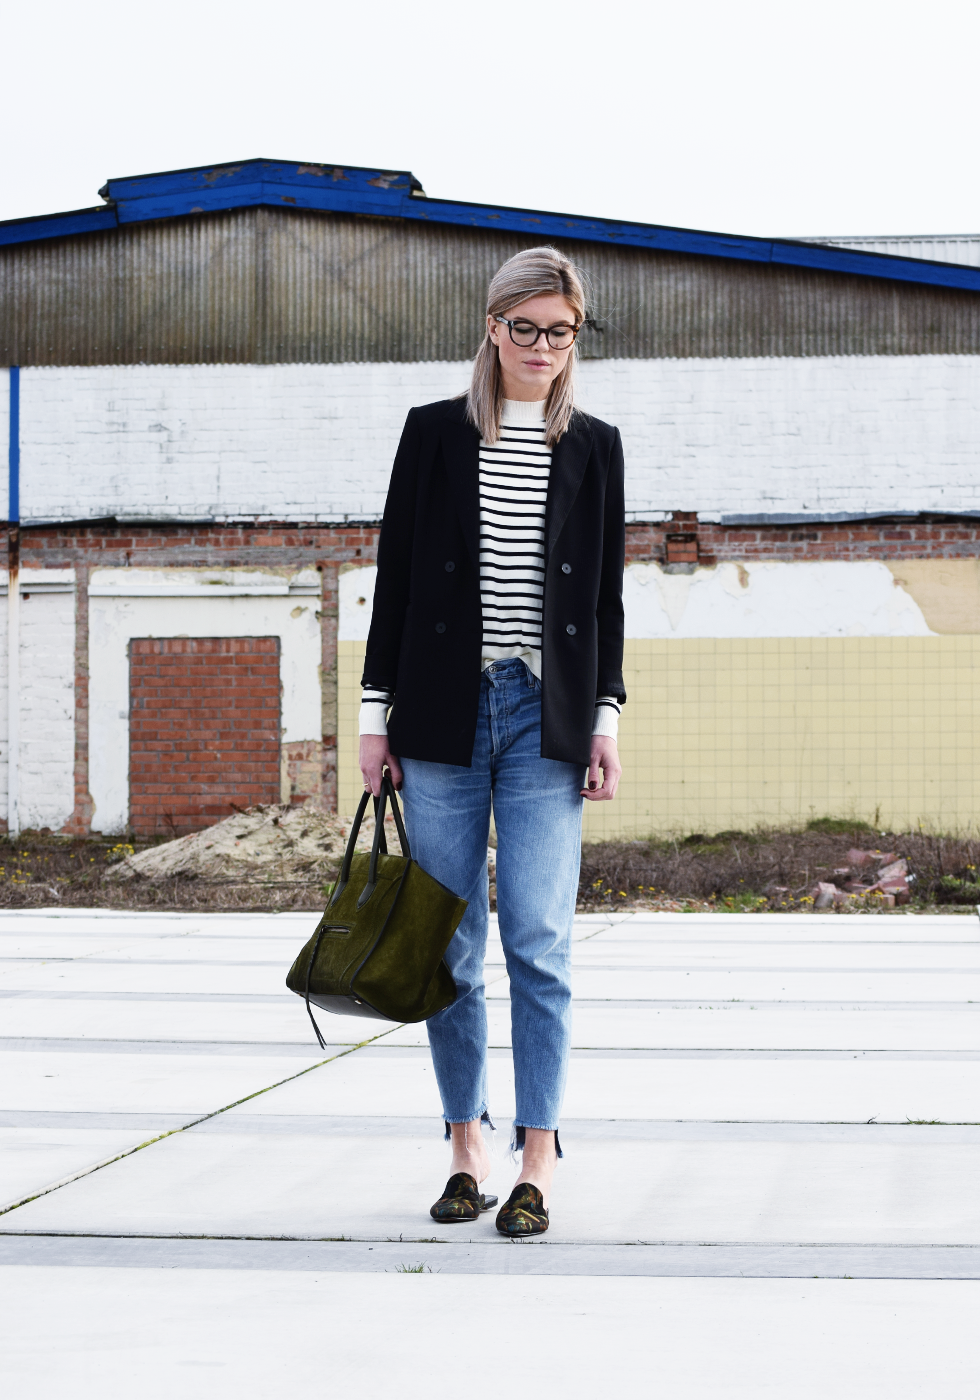 Outfit of the day, MbyM, Zara, Citizens of Humanity, Fendi, Dewolf, Sandro, Céline, ootd, style, fashion, blogger